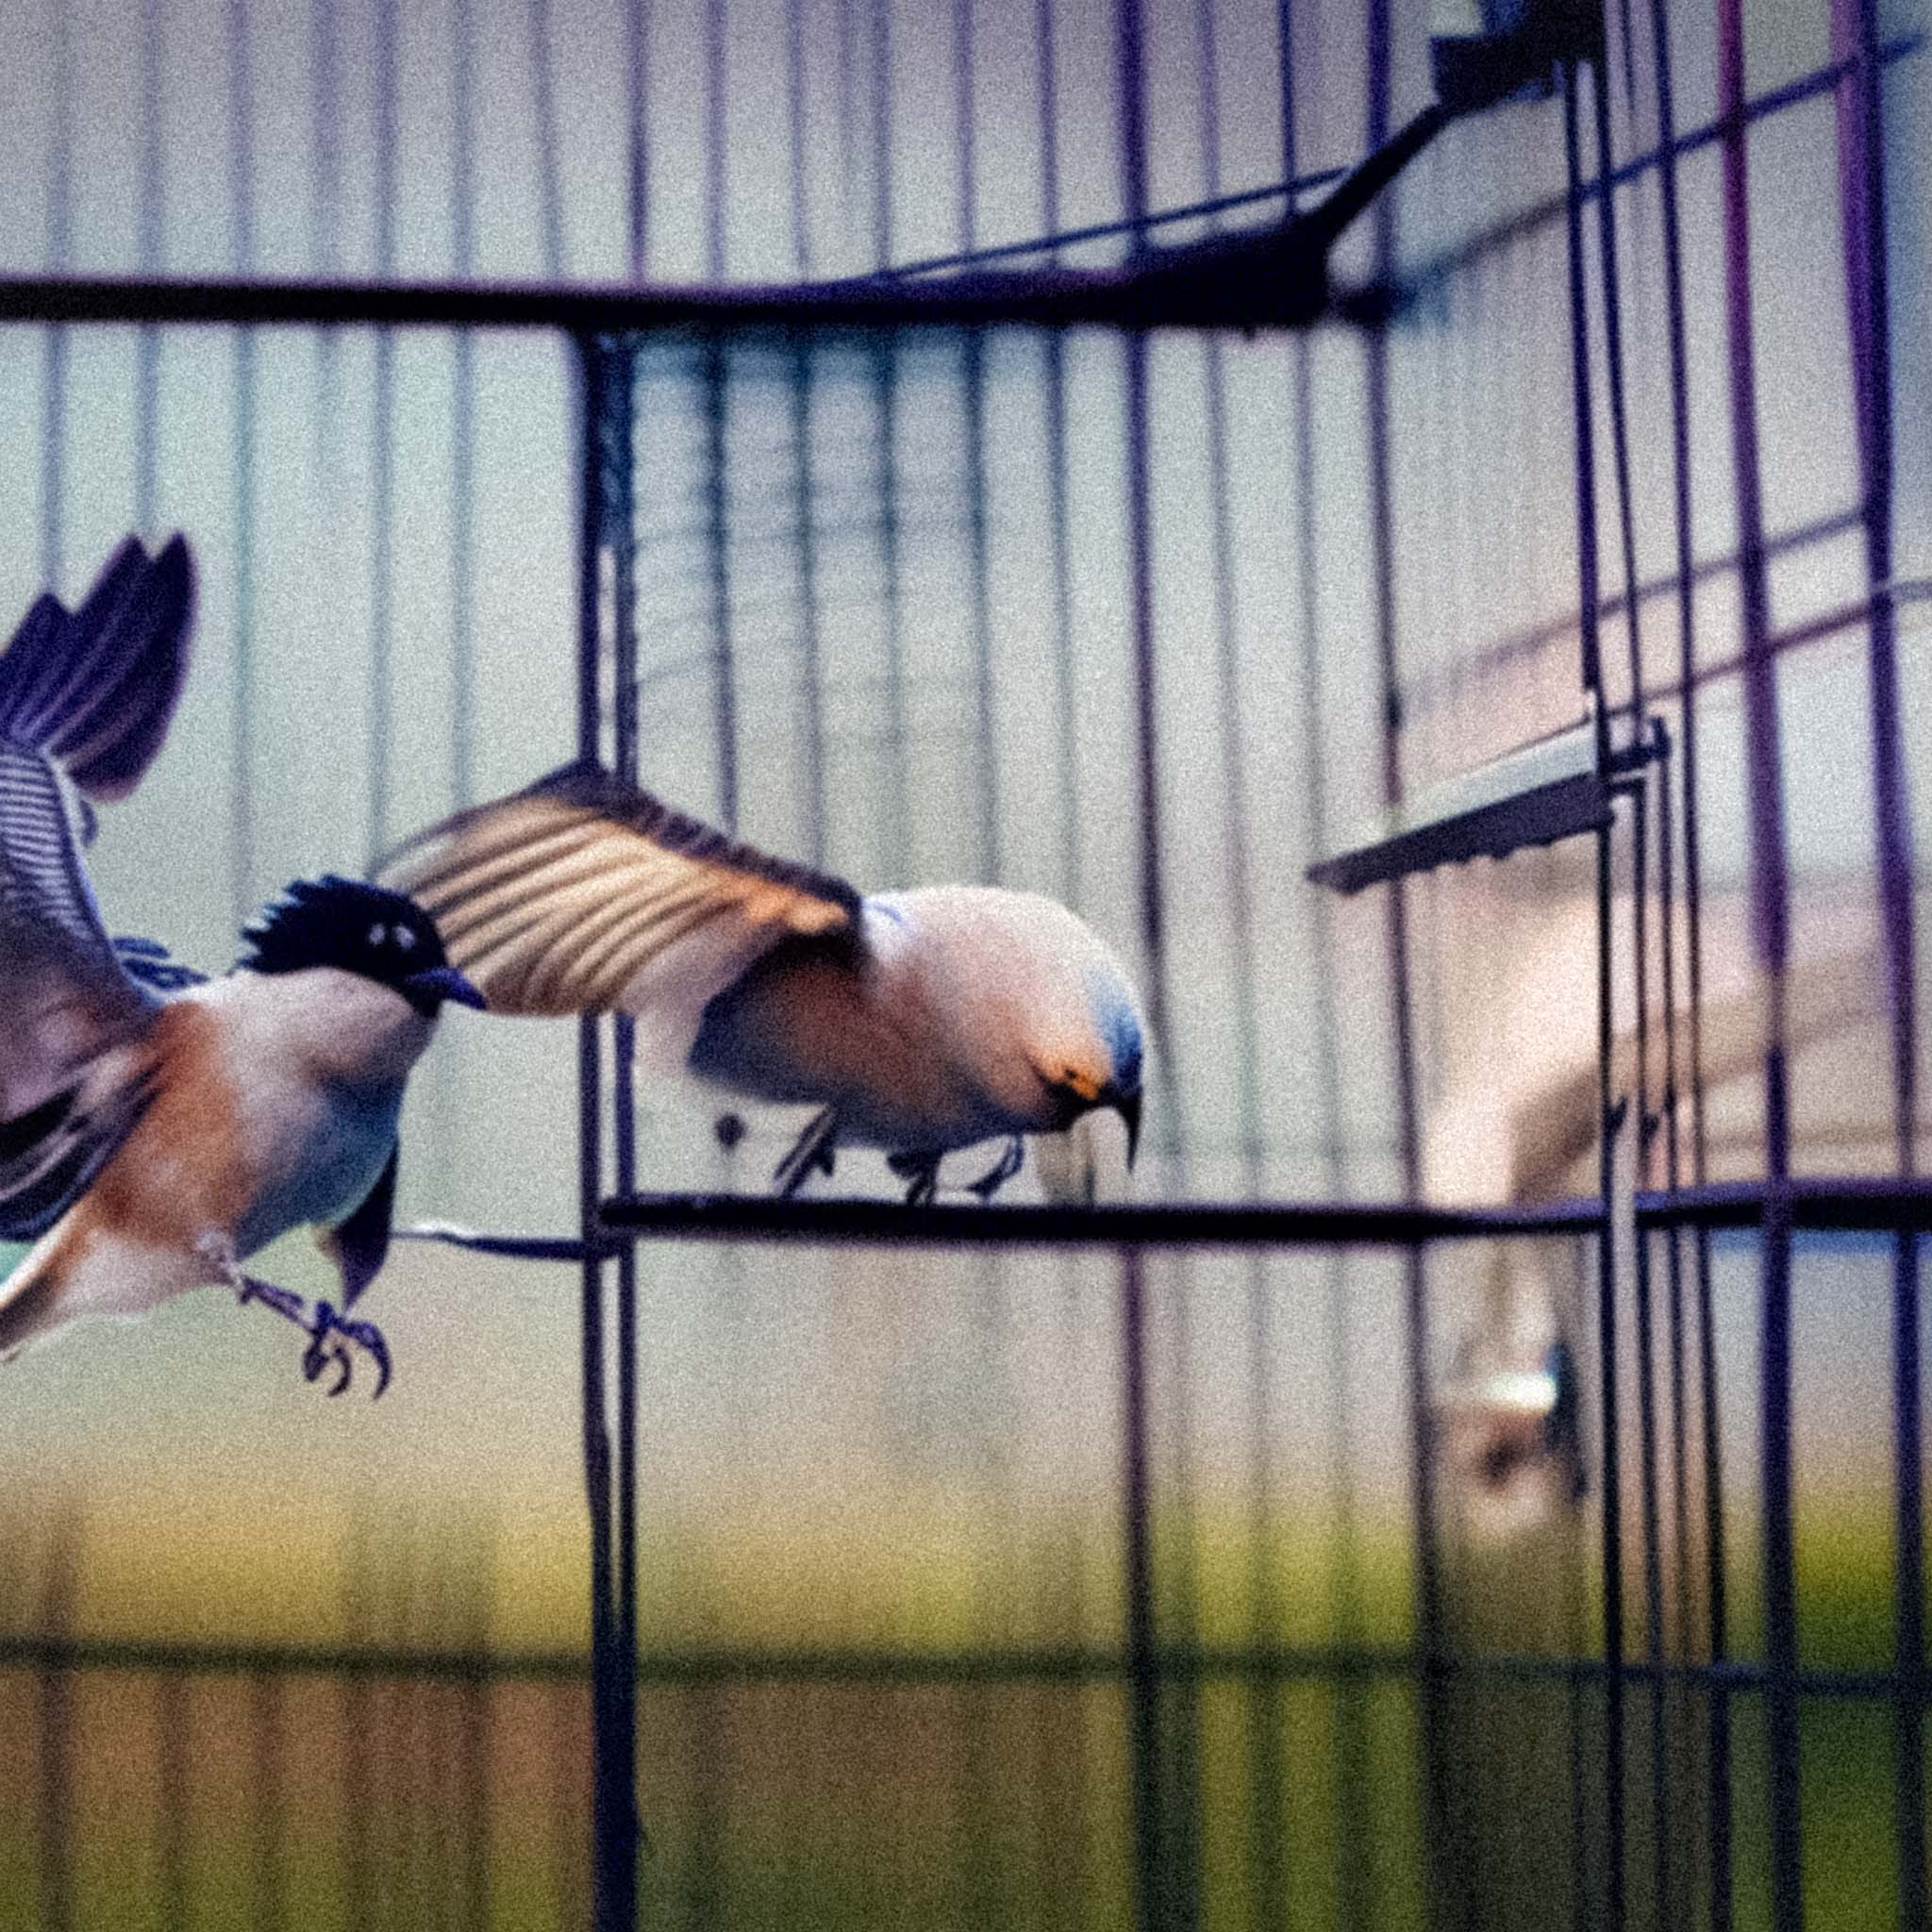 Birds Fighting to Escape Their Cage.jpg